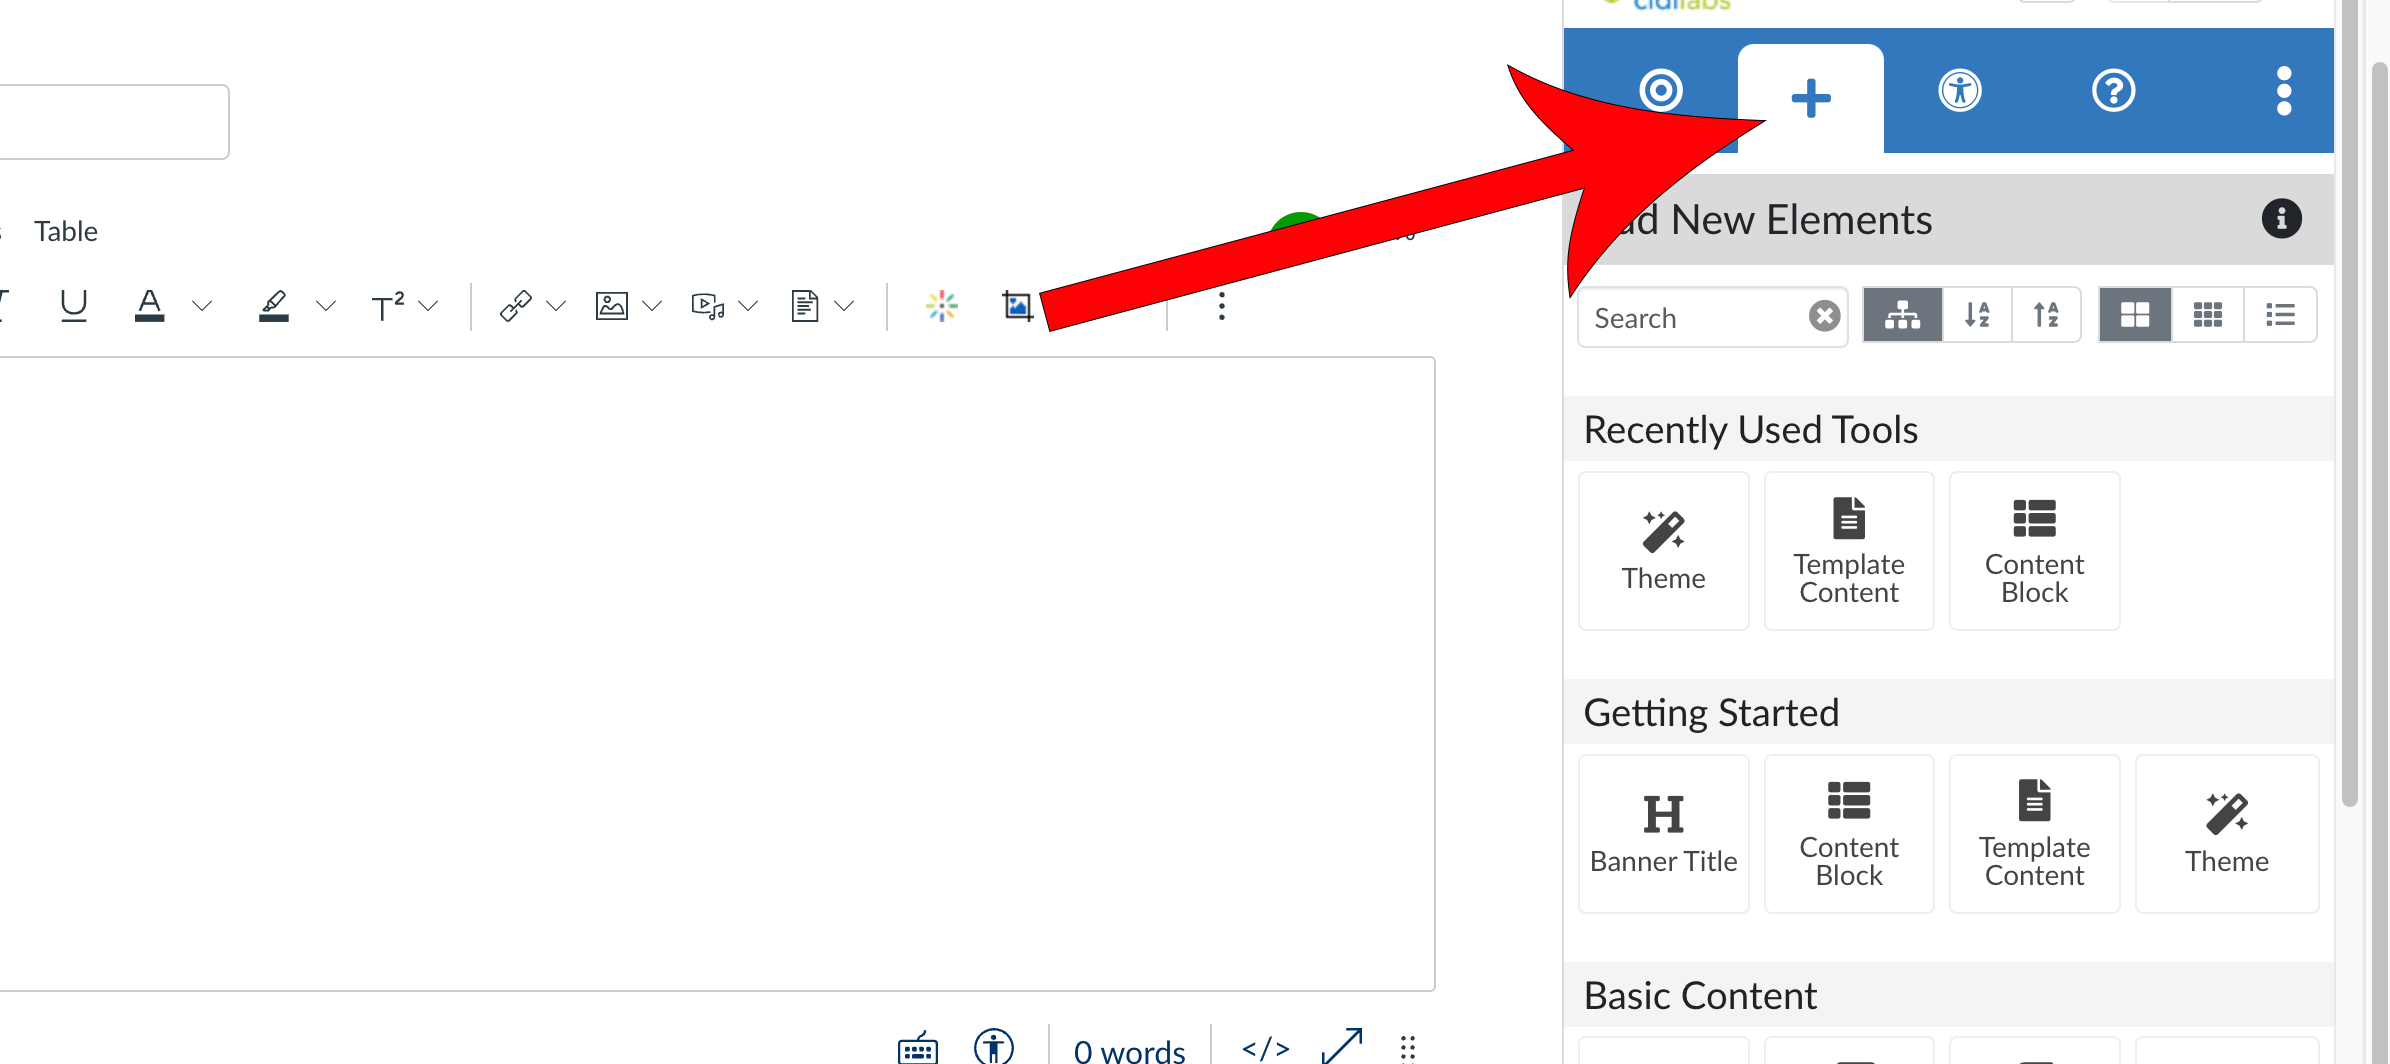 Arrow pointing at + icon in tab bar at the top of the DesignPLUS sidebar.